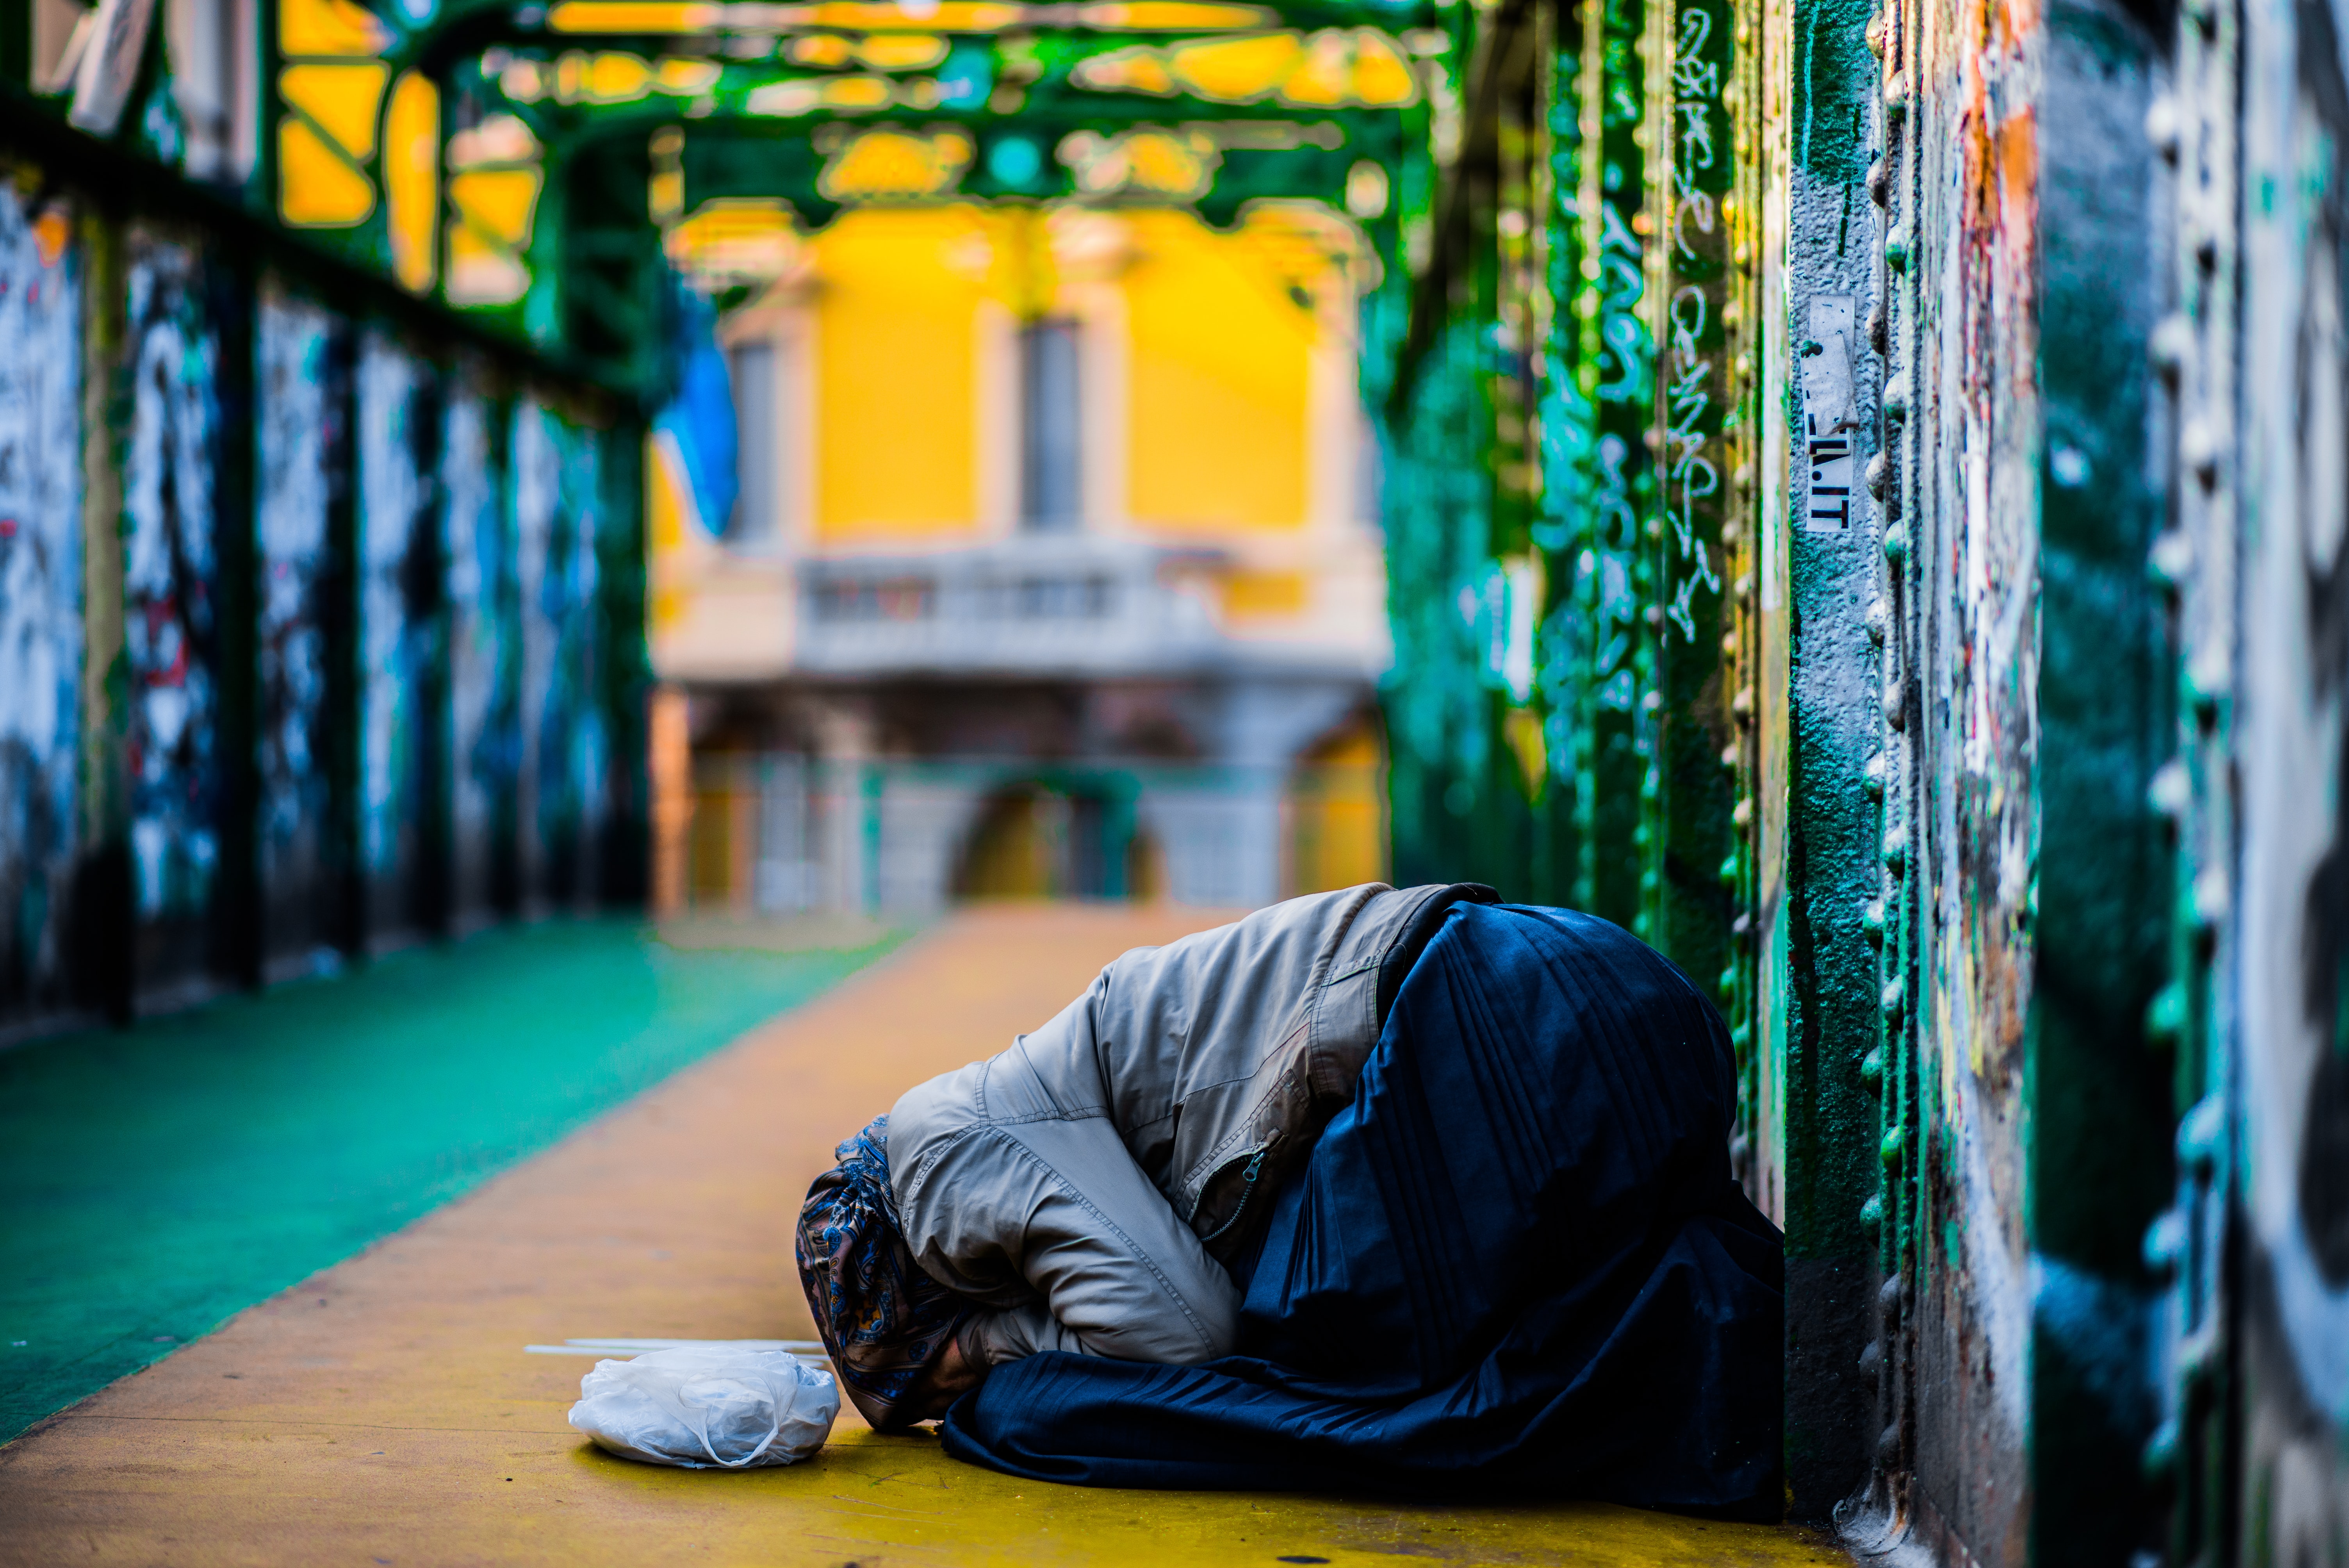 The Sad Reality Of Homelessness “Everyone Wants To Ignore”